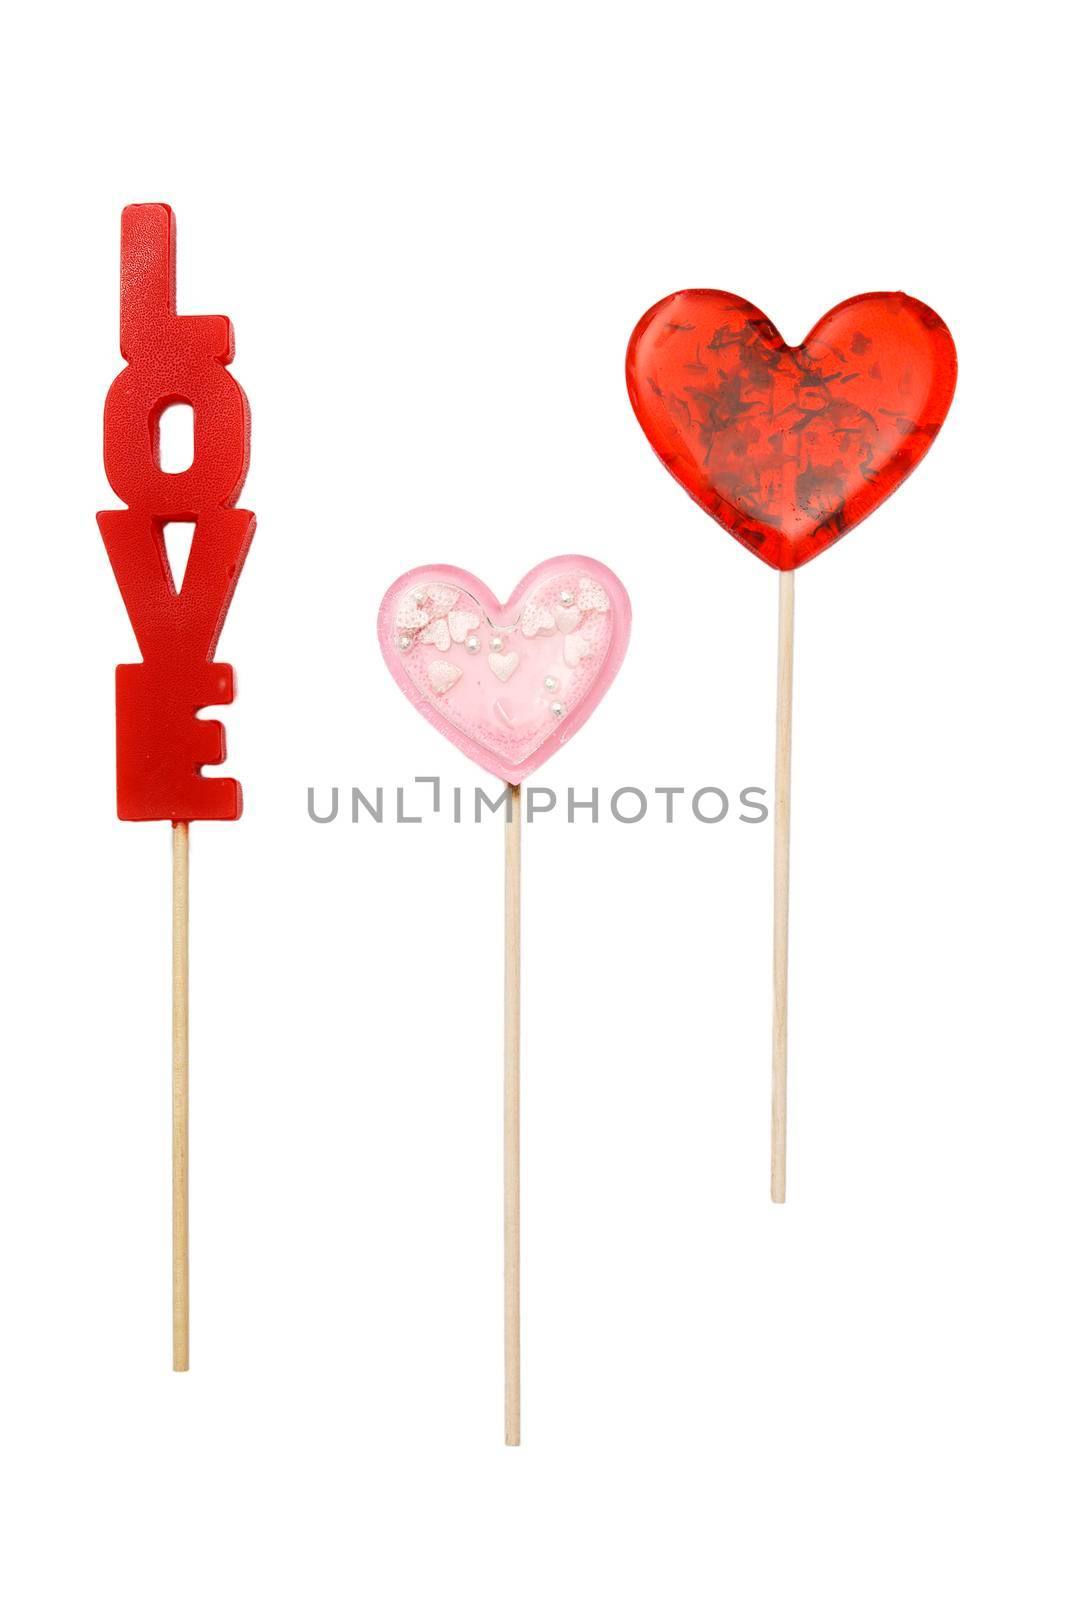 red heart shaped lollipop with herbs and pink star lollipop inside on a stick isolated on white. Gift for Valentine's Day. square format